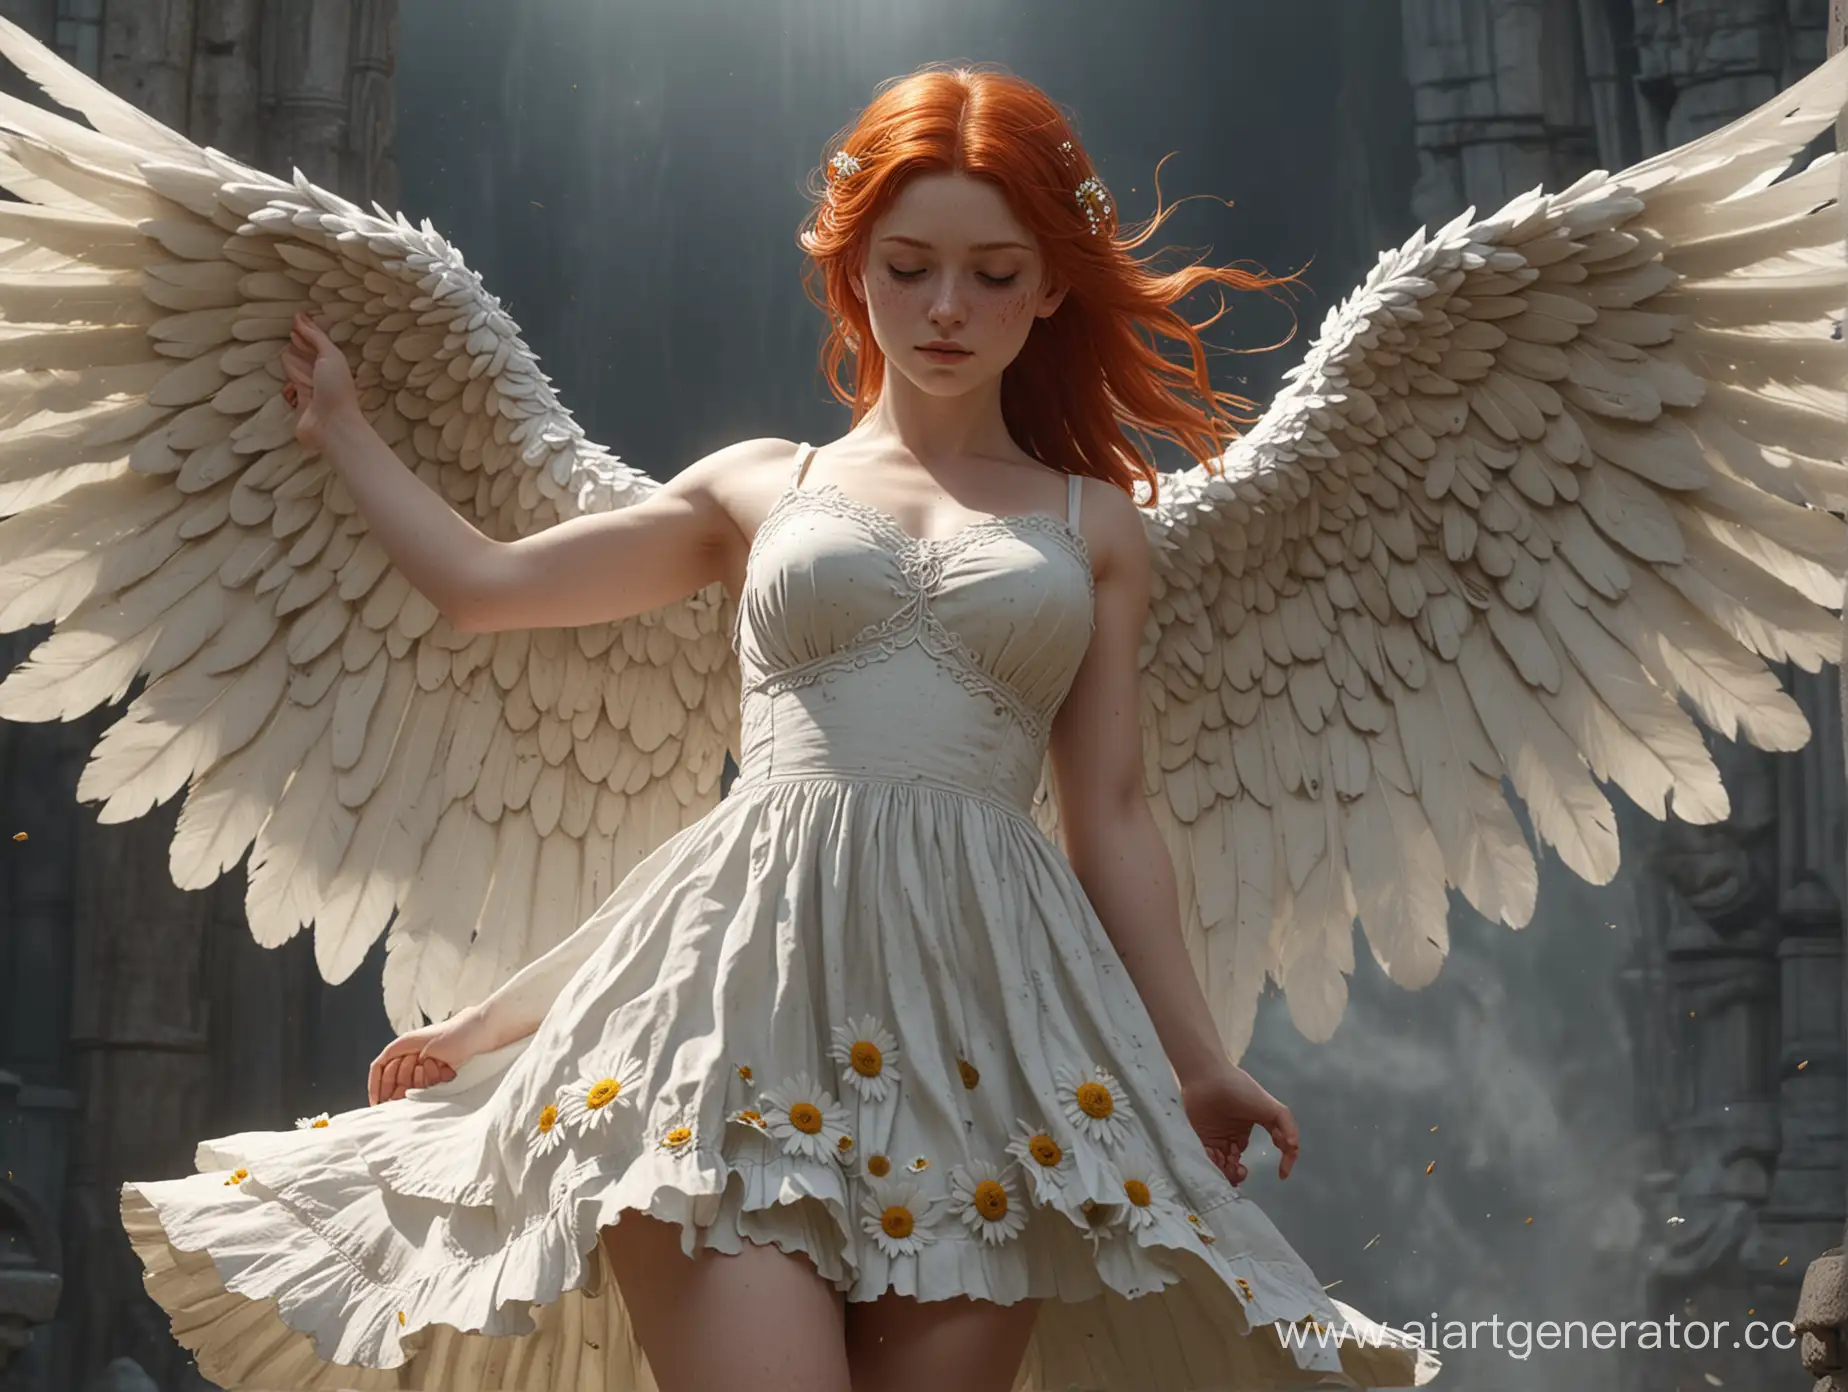 Majestic-Stone-Angel-Carrying-RedHaired-Girl-with-Daisy-Dress-in-Realistic-4K-Art